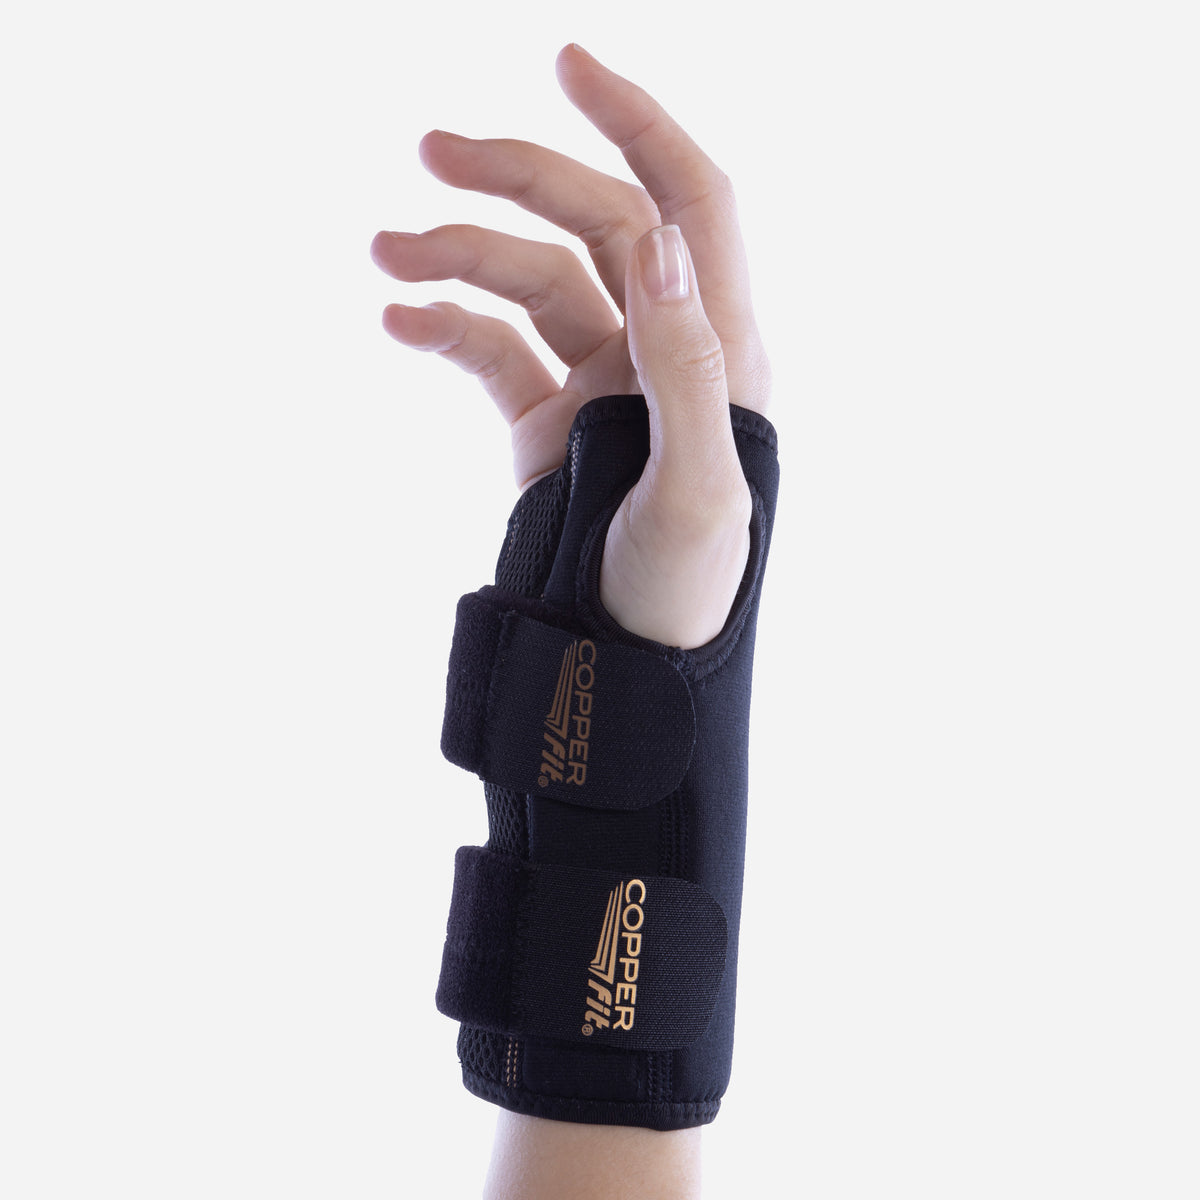 Copper Fit Wrist Brace Stabilize & Support One Size Fits Most